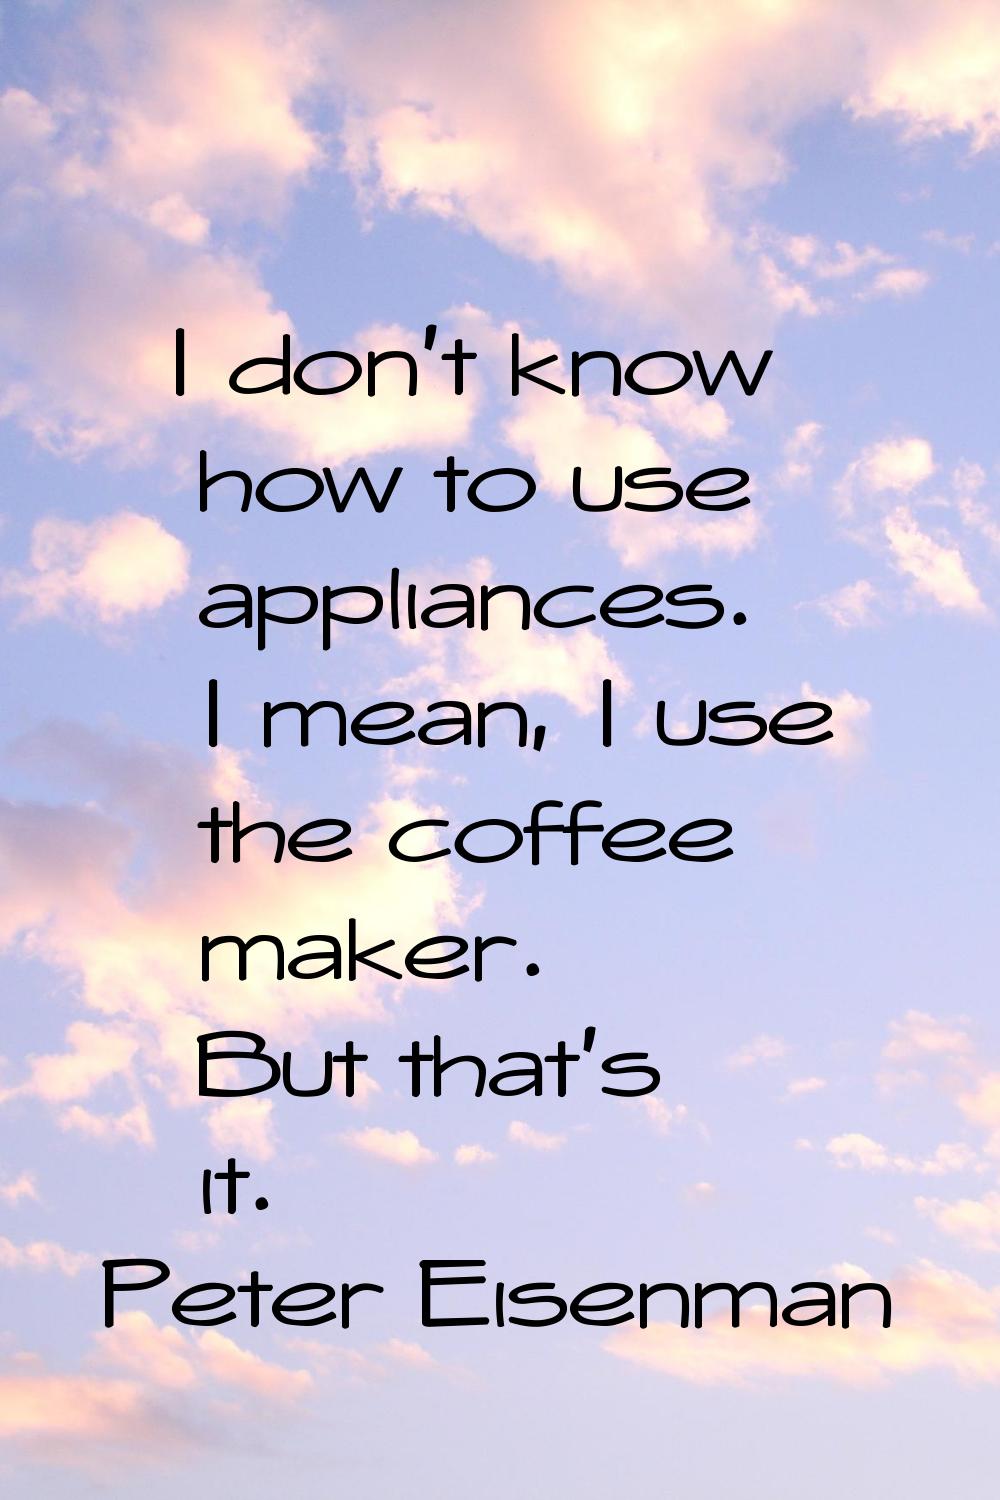 I don't know how to use appliances. I mean, I use the coffee maker. But that's it.